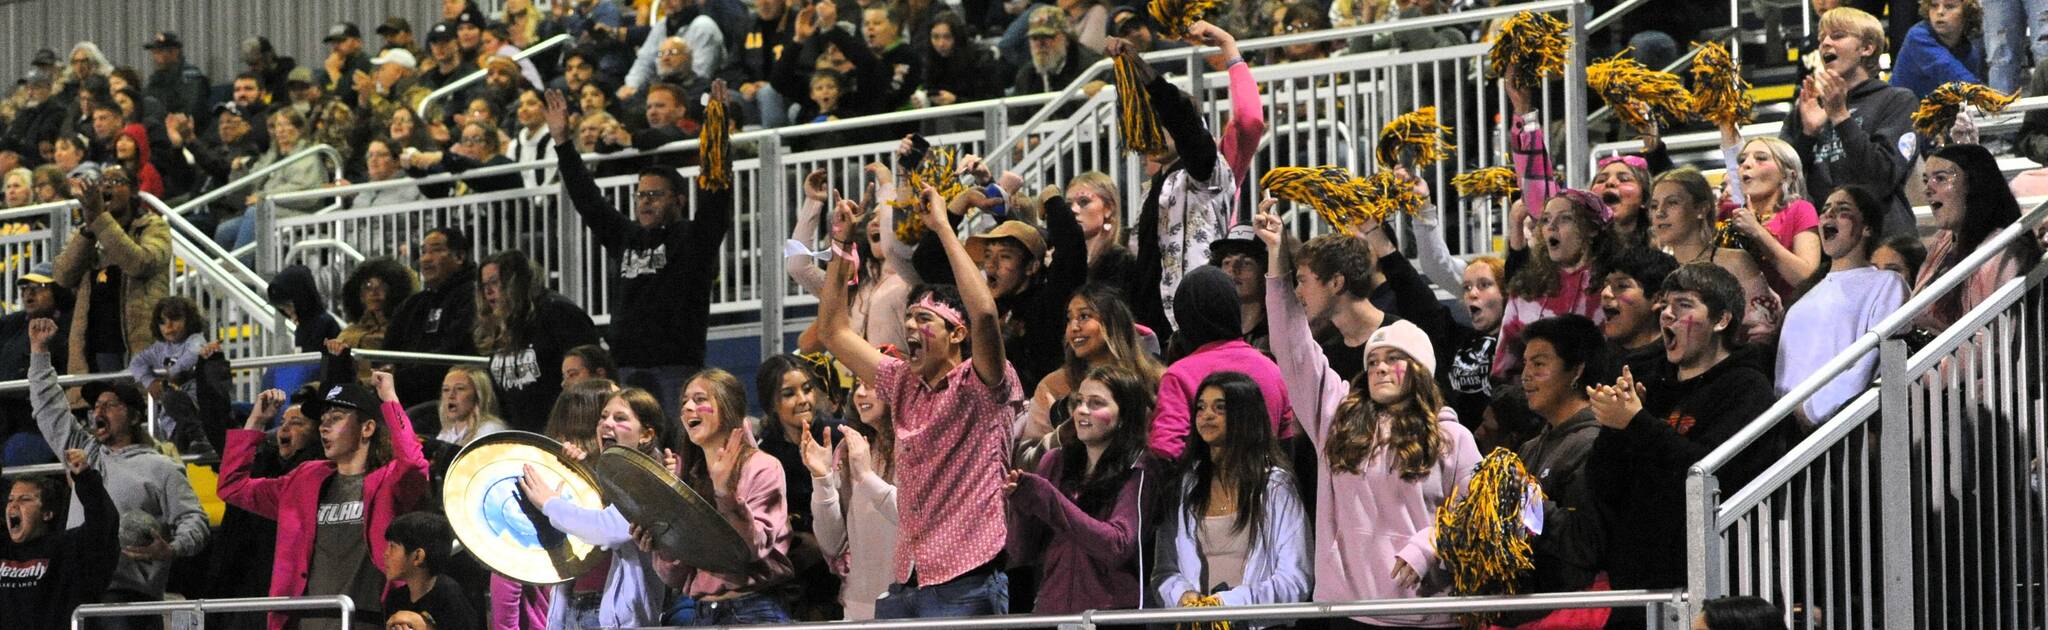 The Spartan student body cheered as the final seconds clicked off the clock giving their beloved football team a victory. Photo by Lonnie Archibald